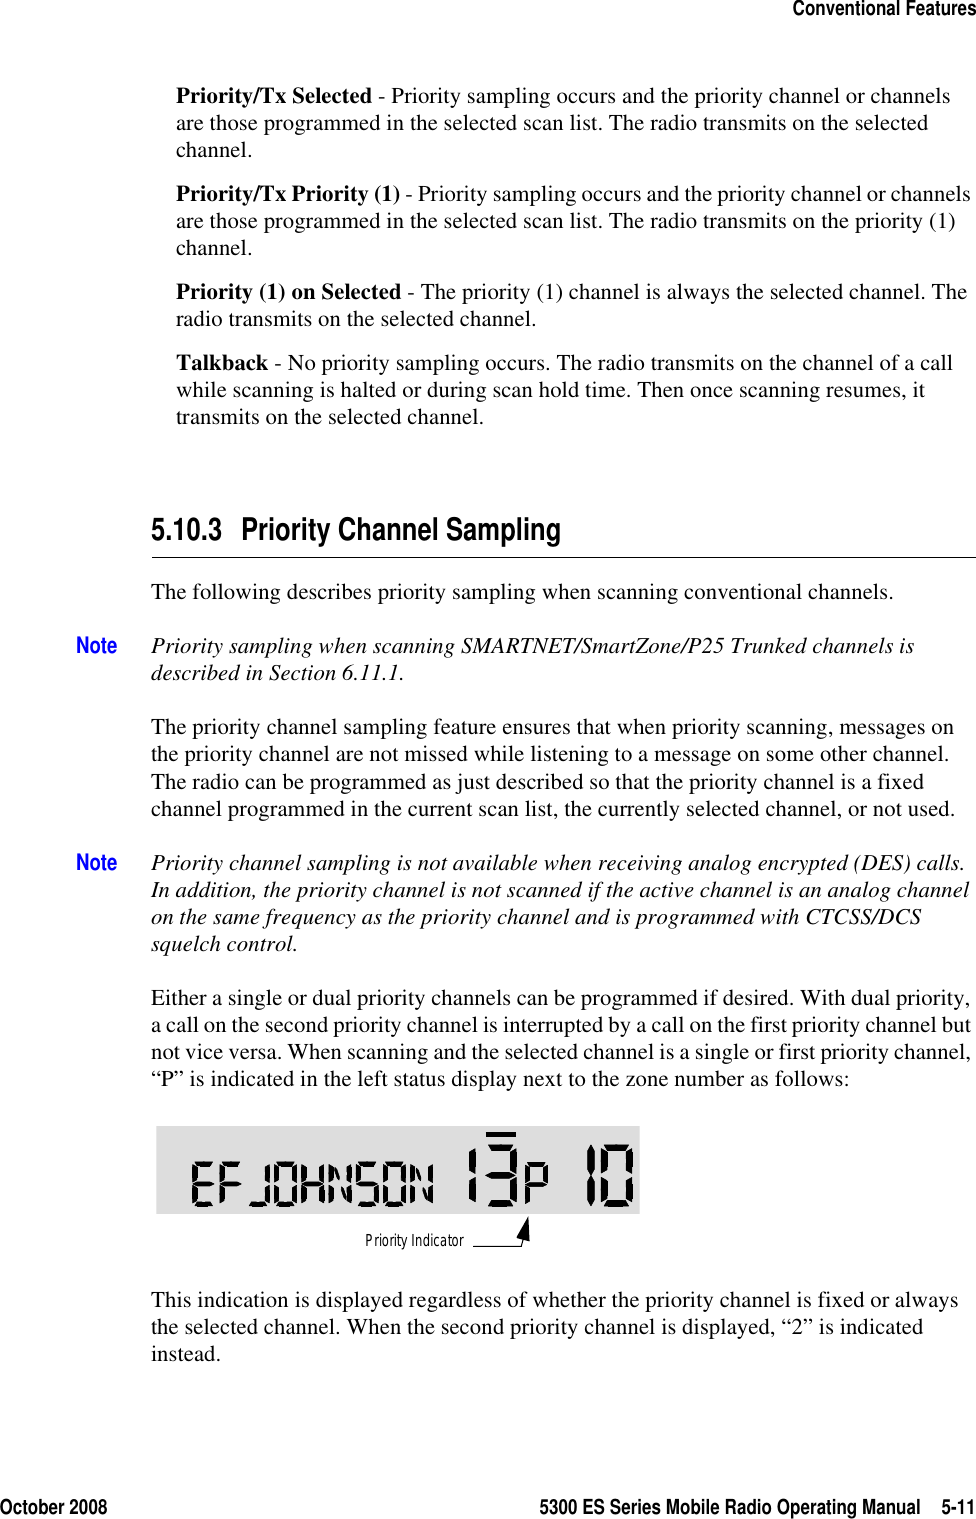 October 2008 5300 ES Series Mobile Radio Operating Manual 5-11Conventional FeaturesPriority/Tx Selected - Priority sampling occurs and the priority channel or channels are those programmed in the selected scan list. The radio transmits on the selected channel.Priority/Tx Priority (1) - Priority sampling occurs and the priority channel or channels are those programmed in the selected scan list. The radio transmits on the priority (1) channel.Priority (1) on Selected - The priority (1) channel is always the selected channel. The radio transmits on the selected channel.Talkback - No priority sampling occurs. The radio transmits on the channel of a call while scanning is halted or during scan hold time. Then once scanning resumes, it transmits on the selected channel.5.10.3 Priority Channel SamplingThe following describes priority sampling when scanning conventional channels.Note Priority sampling when scanning SMARTNET/SmartZone/P25 Trunked channels is described in Section 6.11.1.The priority channel sampling feature ensures that when priority scanning, messages on the priority channel are not missed while listening to a message on some other channel. The radio can be programmed as just described so that the priority channel is a fixed channel programmed in the current scan list, the currently selected channel, or not used.Note Priority channel sampling is not available when receiving analog encrypted (DES) calls. In addition, the priority channel is not scanned if the active channel is an analog channel on the same frequency as the priority channel and is programmed with CTCSS/DCS squelch control.Either a single or dual priority channels can be programmed if desired. With dual priority, a call on the second priority channel is interrupted by a call on the first priority channel but not vice versa. When scanning and the selected channel is a single or first priority channel, “P” is indicated in the left status display next to the zone number as follows: This indication is displayed regardless of whether the priority channel is fixed or always the selected channel. When the second priority channel is displayed, “2” is indicated instead.Priority Indicator